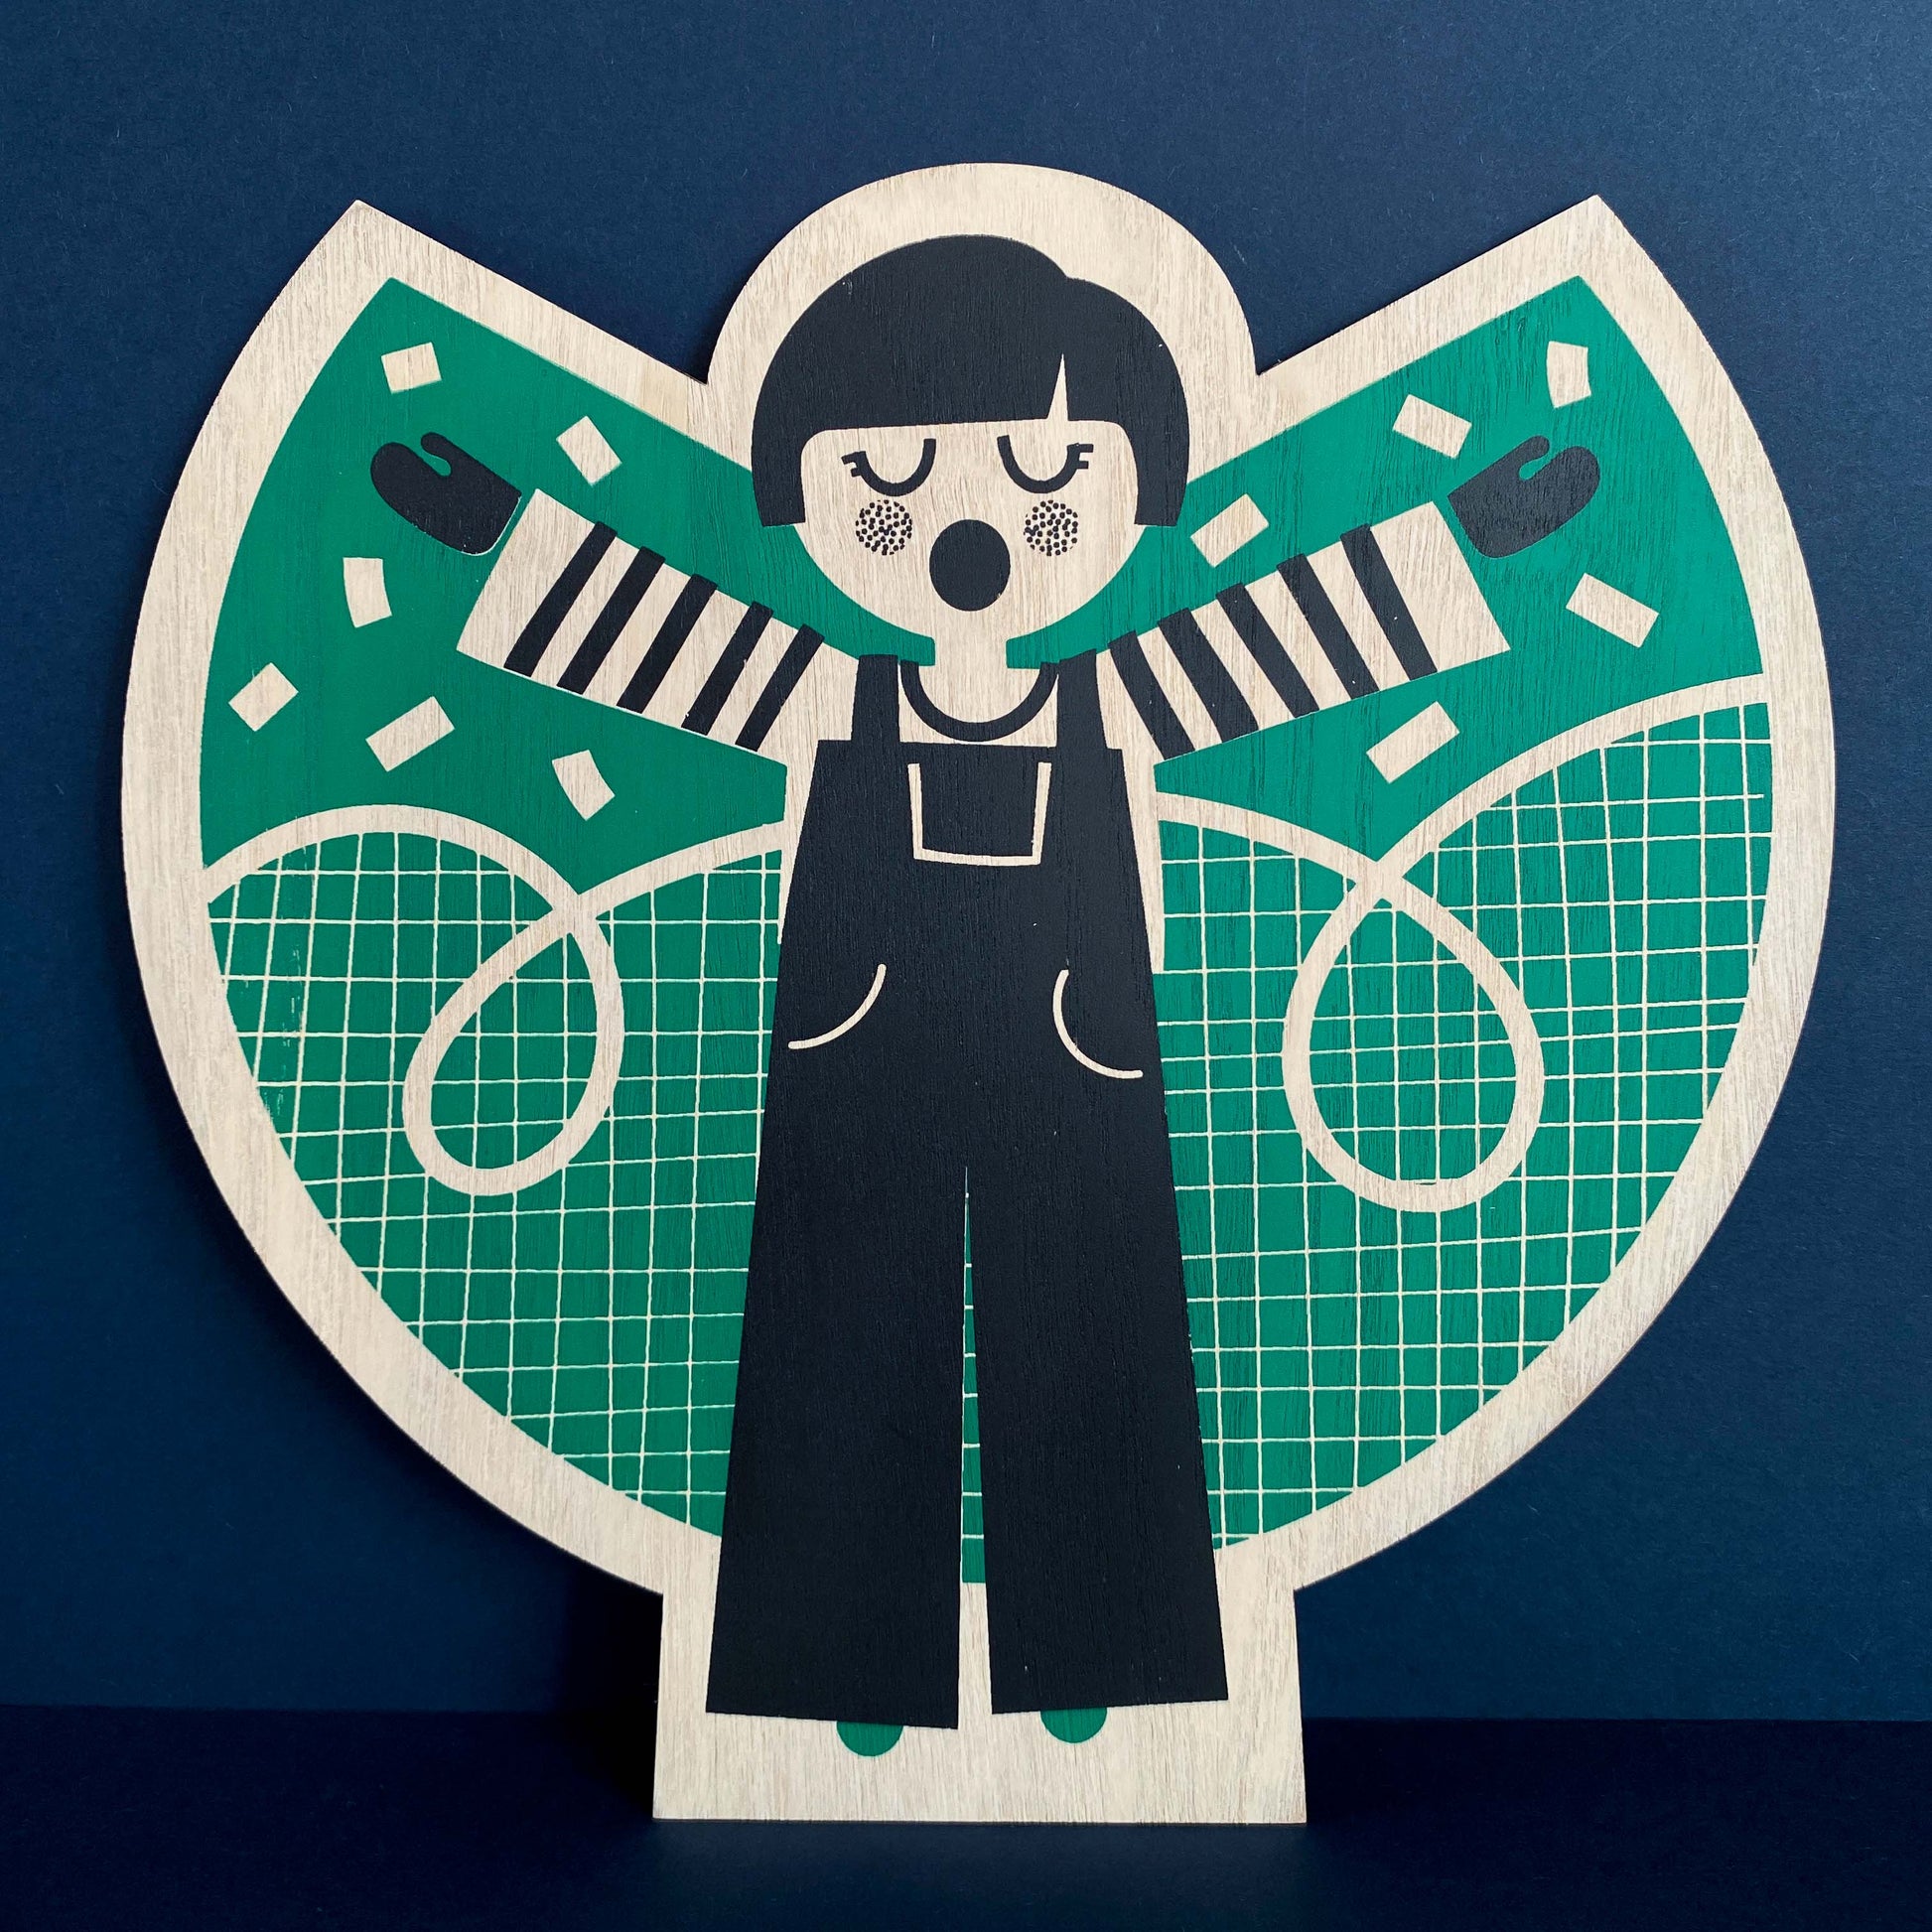 Wooden Screen Printed Angel by The Print Lass - shown on navy background